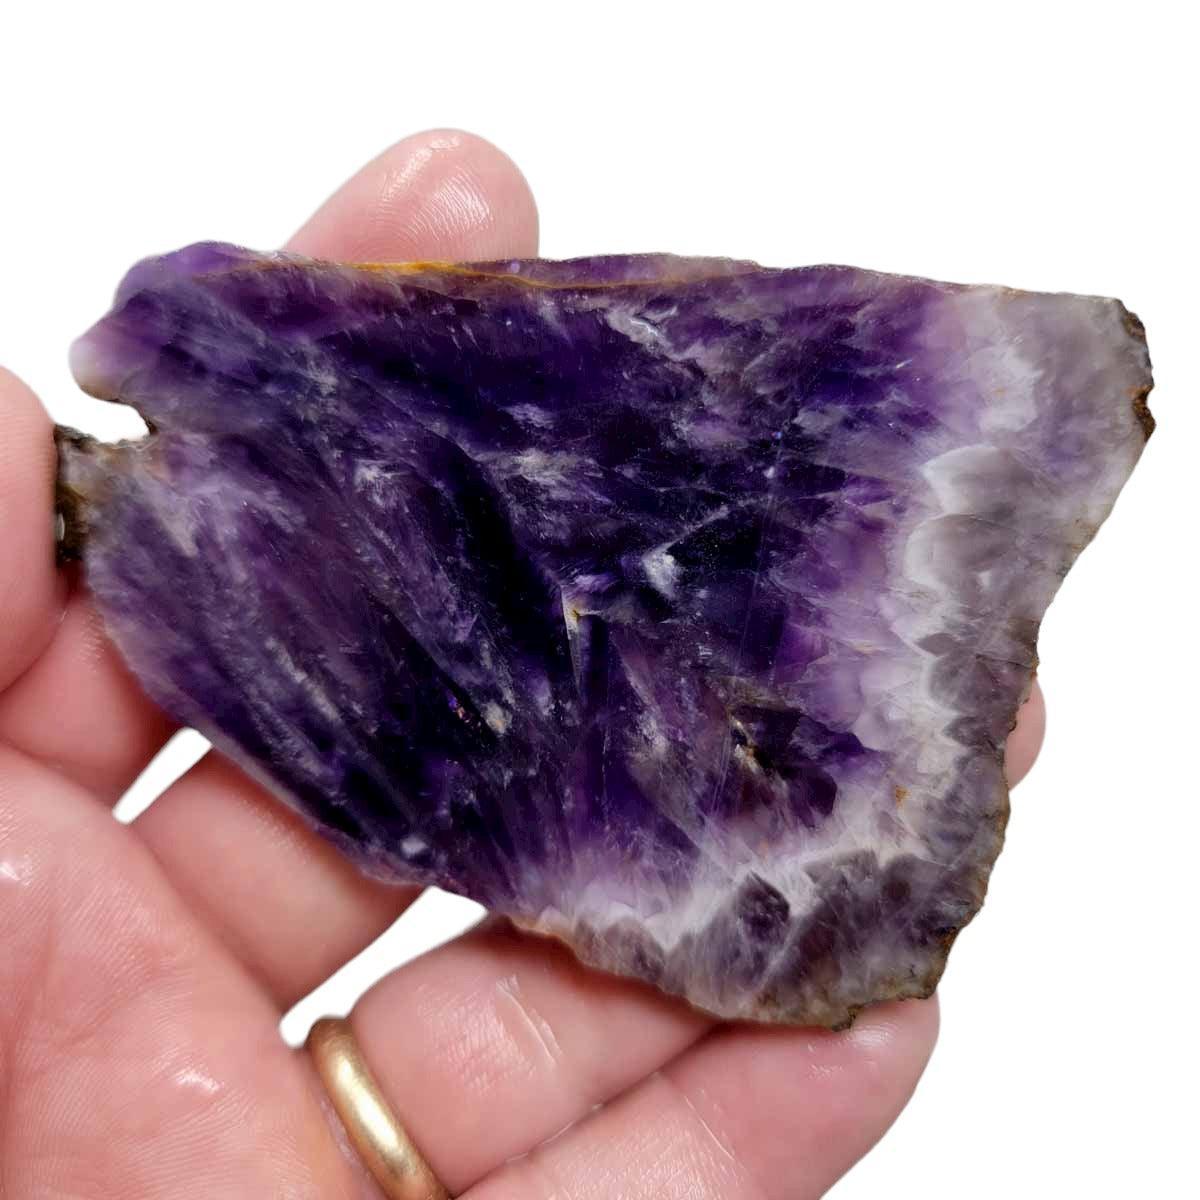 Moroccan Amethyst Lace Agate Slab!  Lapidary Stone Slab! - LapidaryCentral